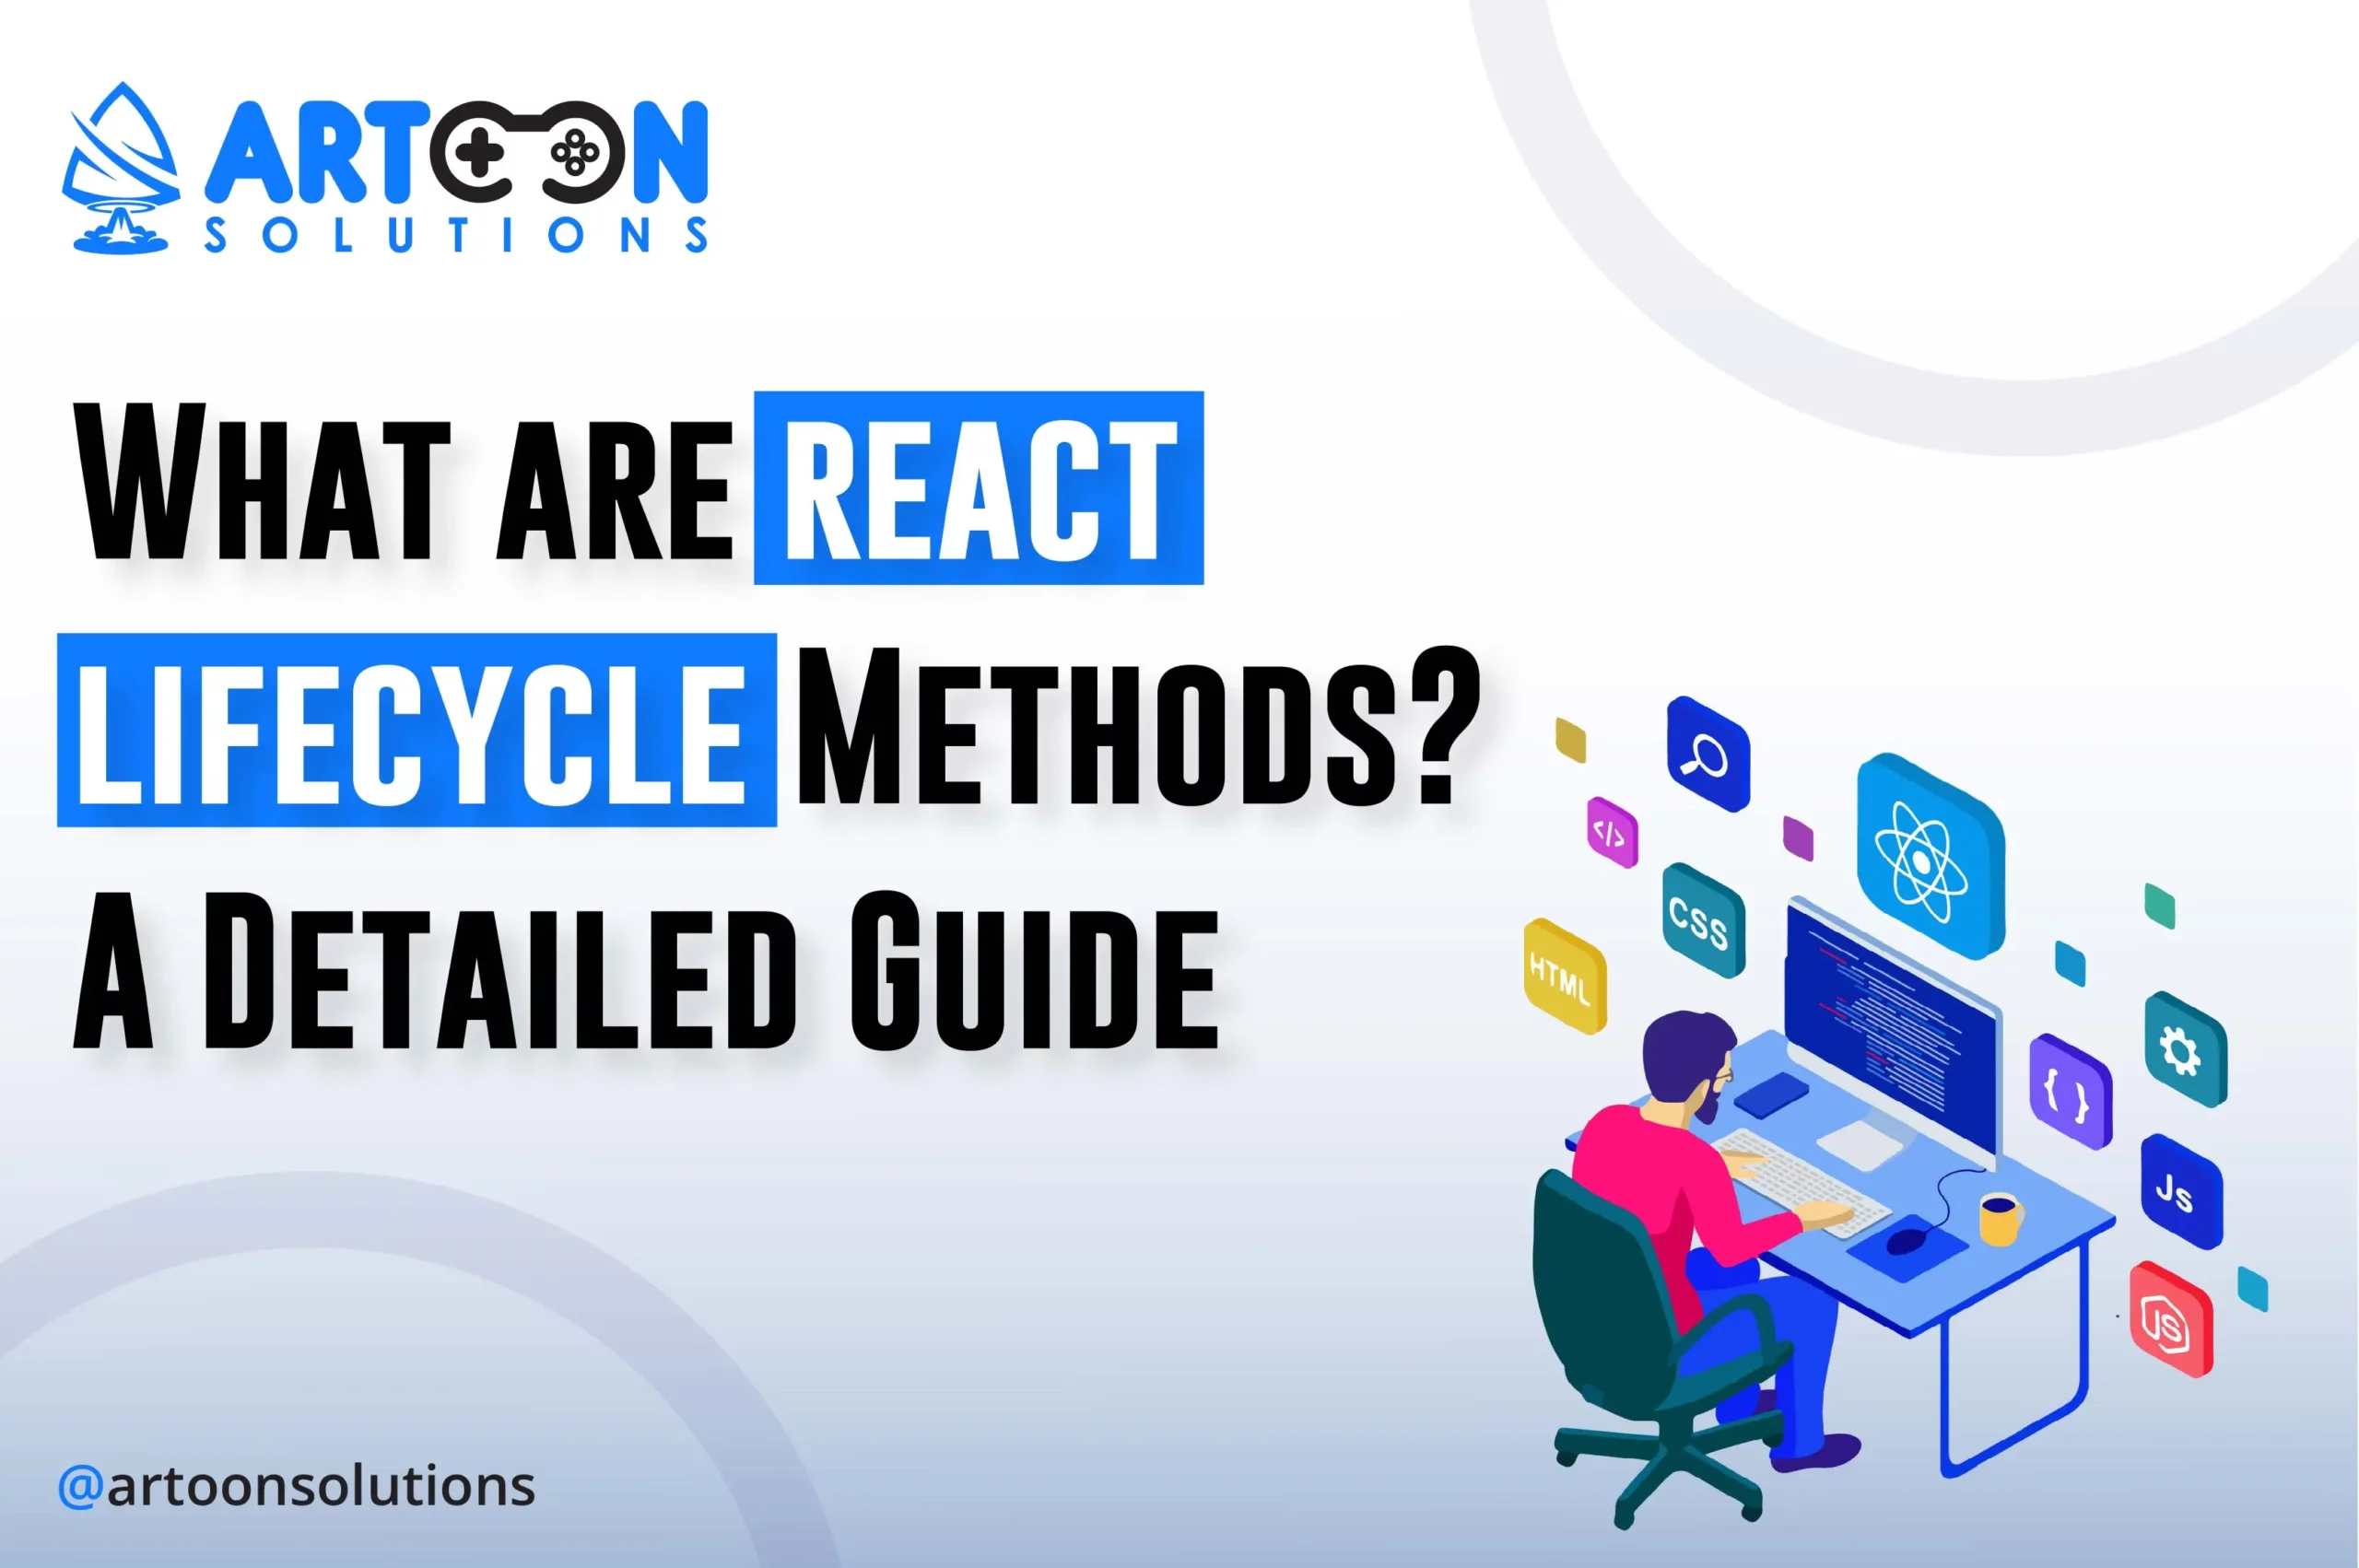 What are react lifecycle methods? A Detailed Guide